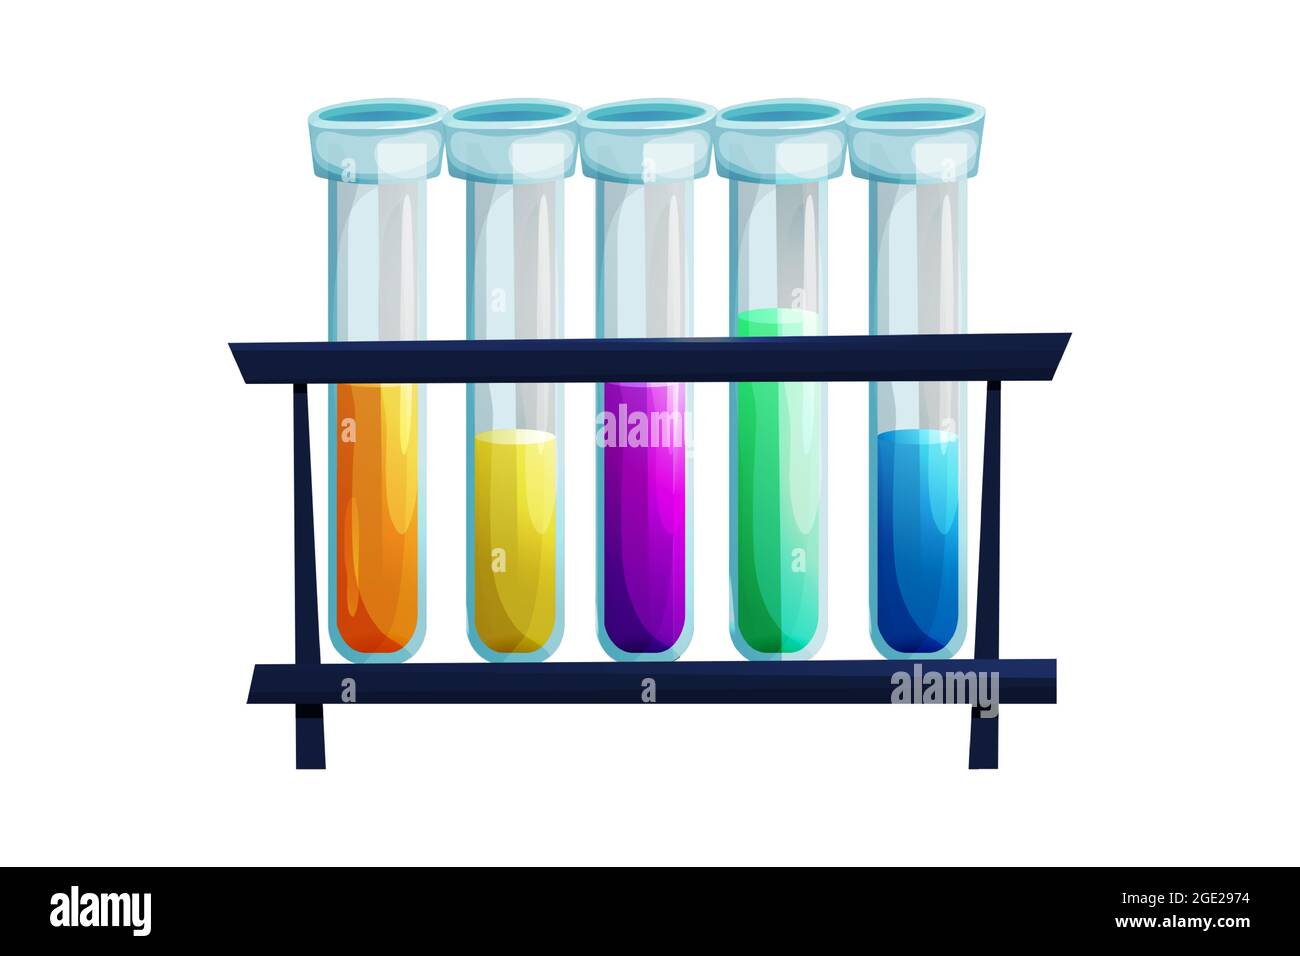 Test tubes, glass bottles with liquid in different colors in cartoon style isolated on white background. Lab, chemistry element, science equipment. Vector illustration Stock Vector